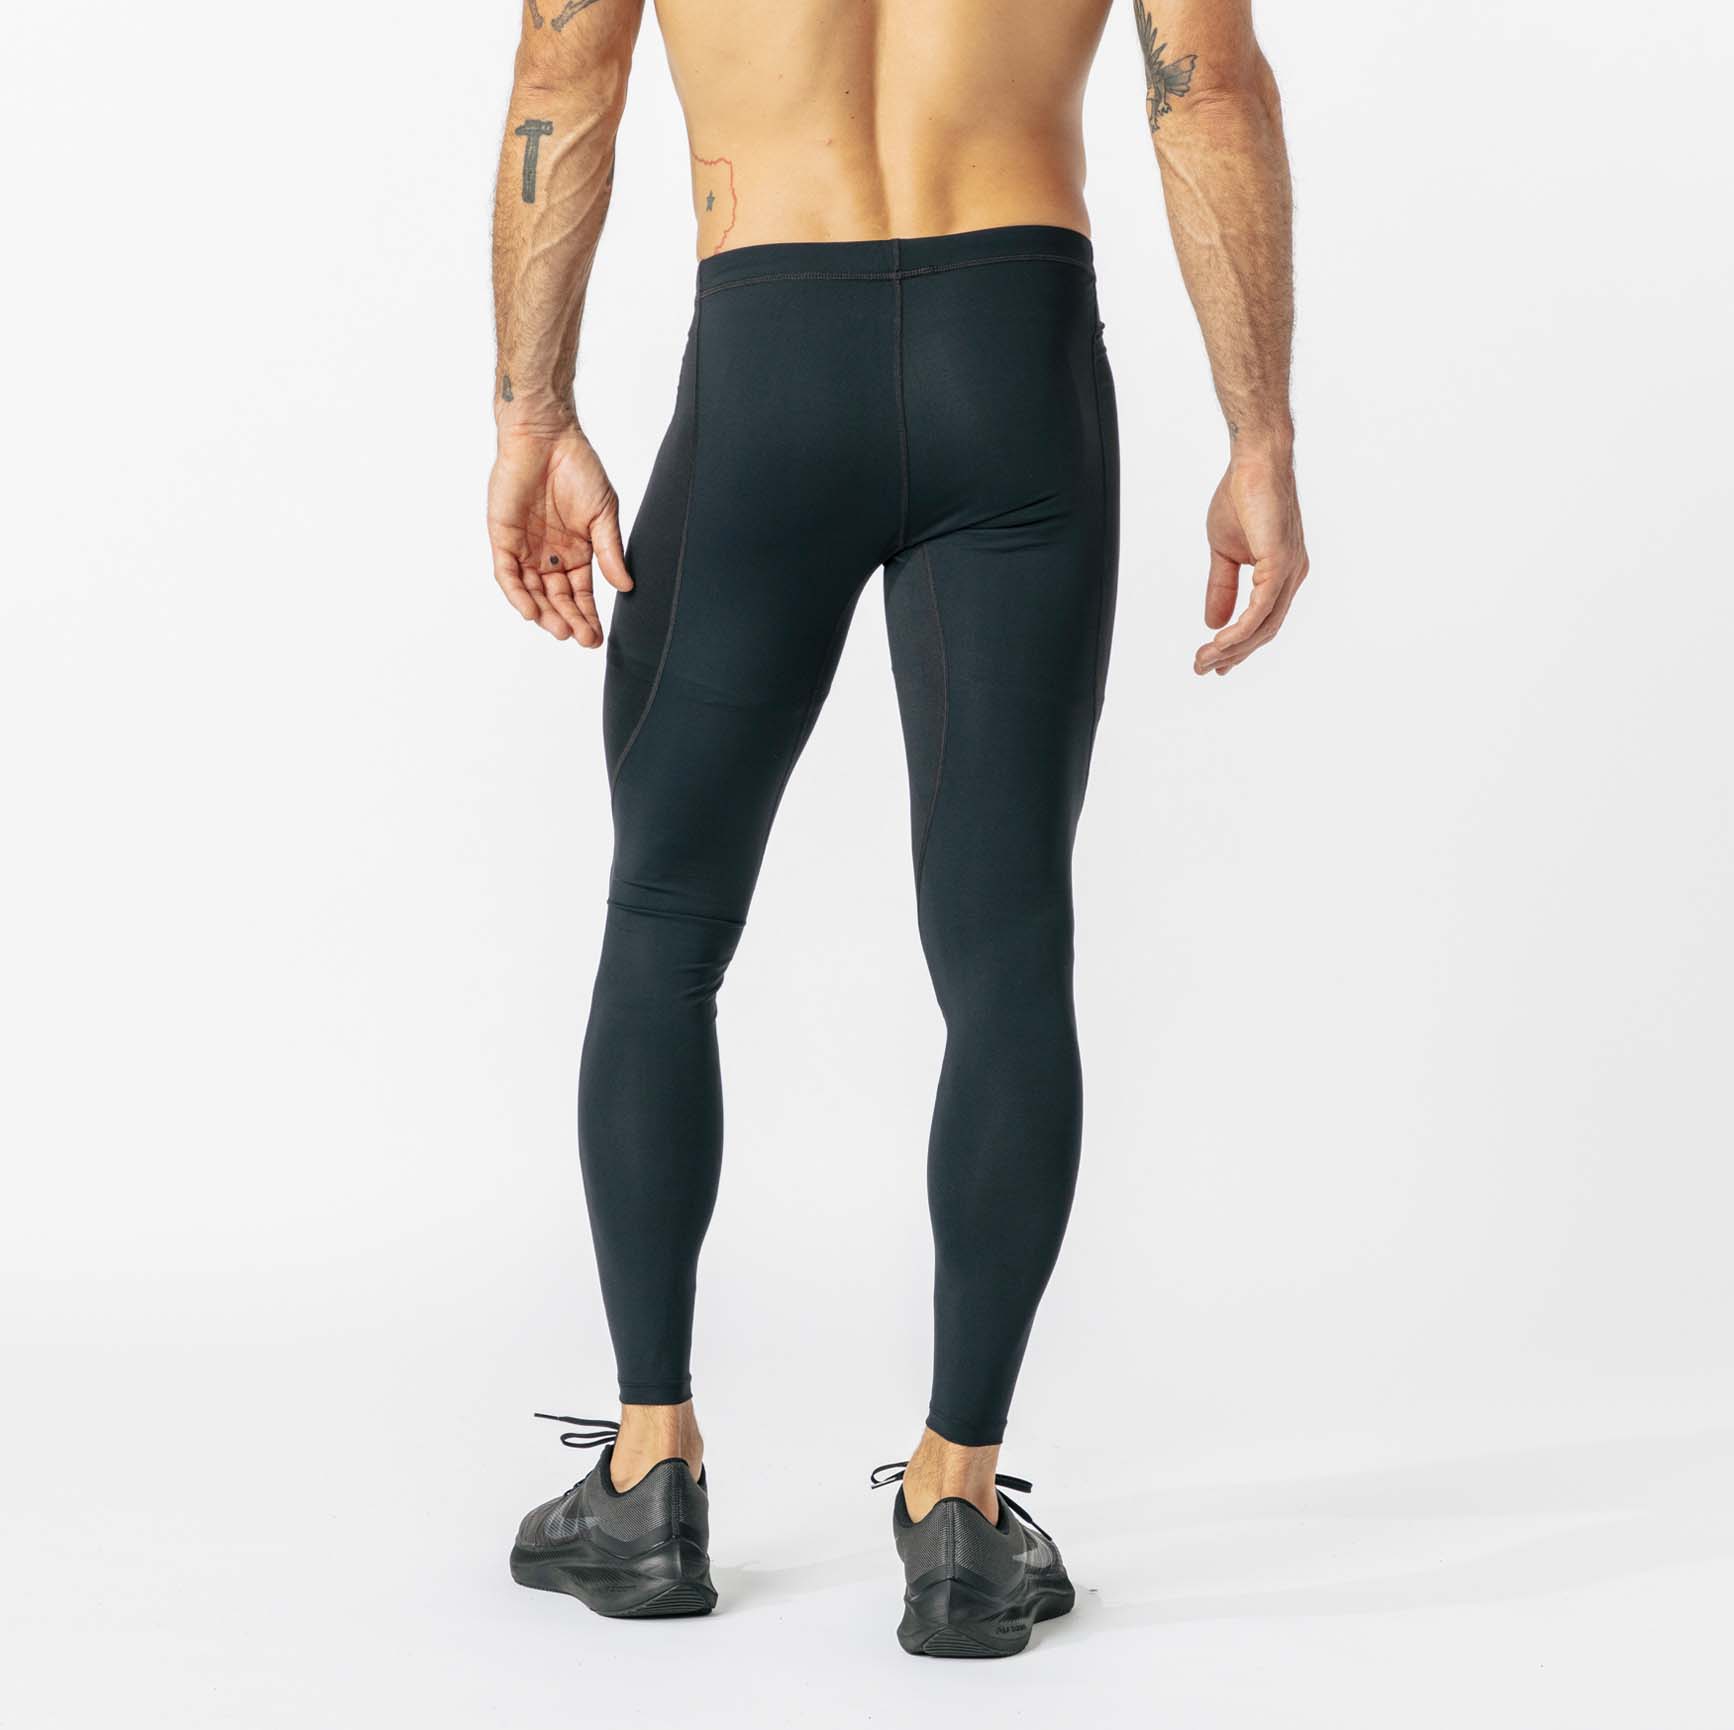 Mens Compression Tight Trouser Winter Sports Gym Running Thermal